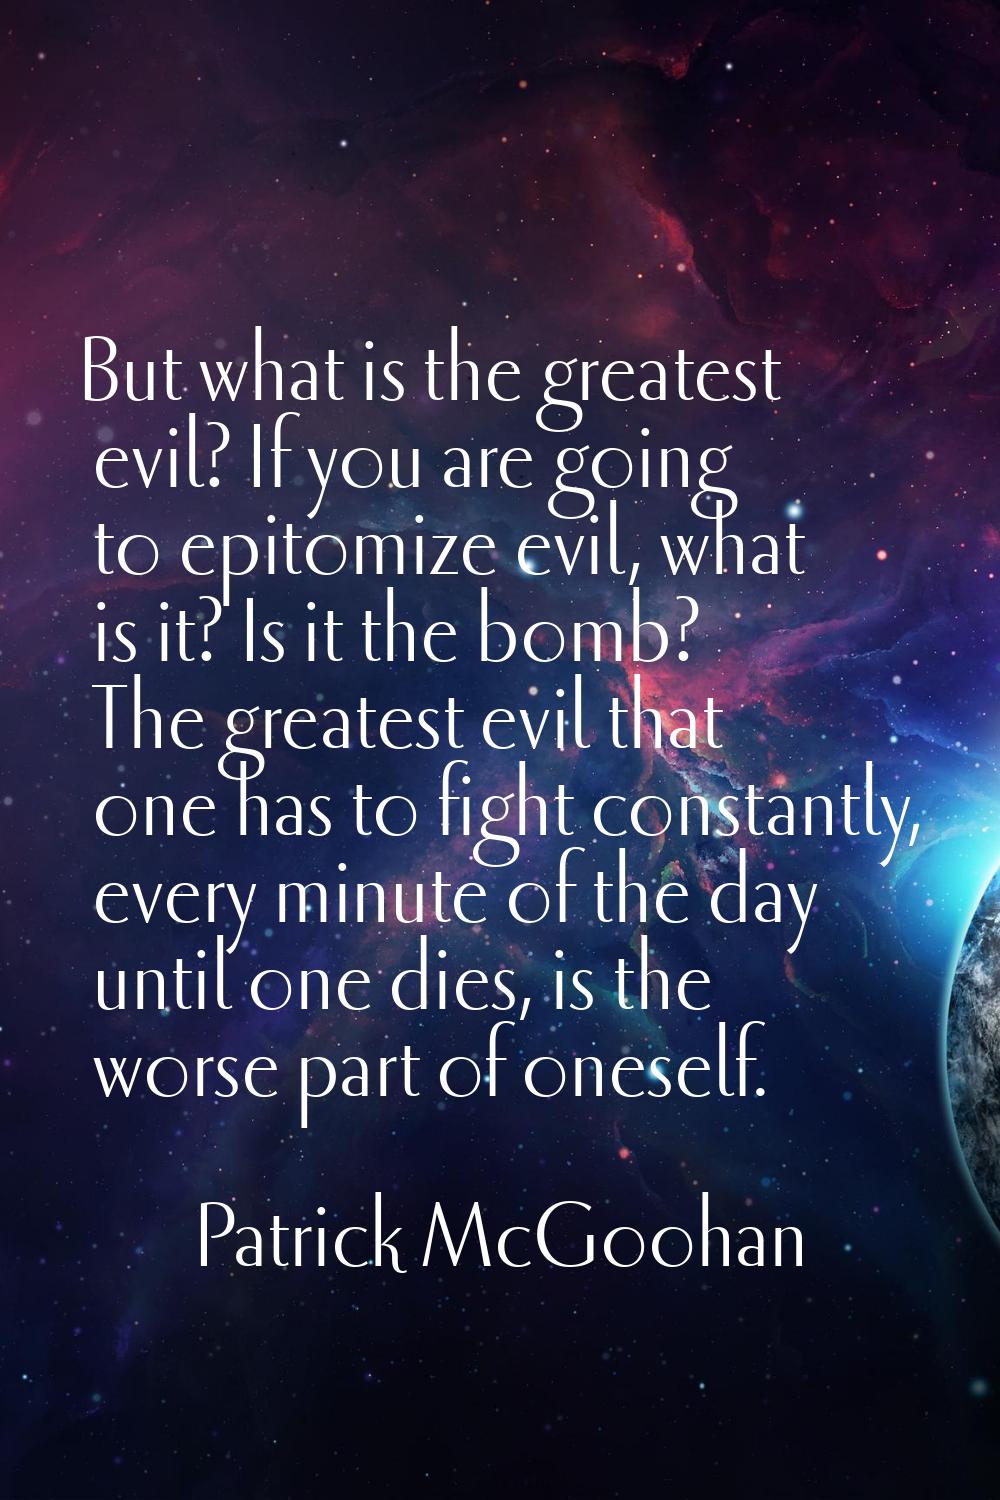 But what is the greatest evil? If you are going to epitomize evil, what is it? Is it the bomb? The 